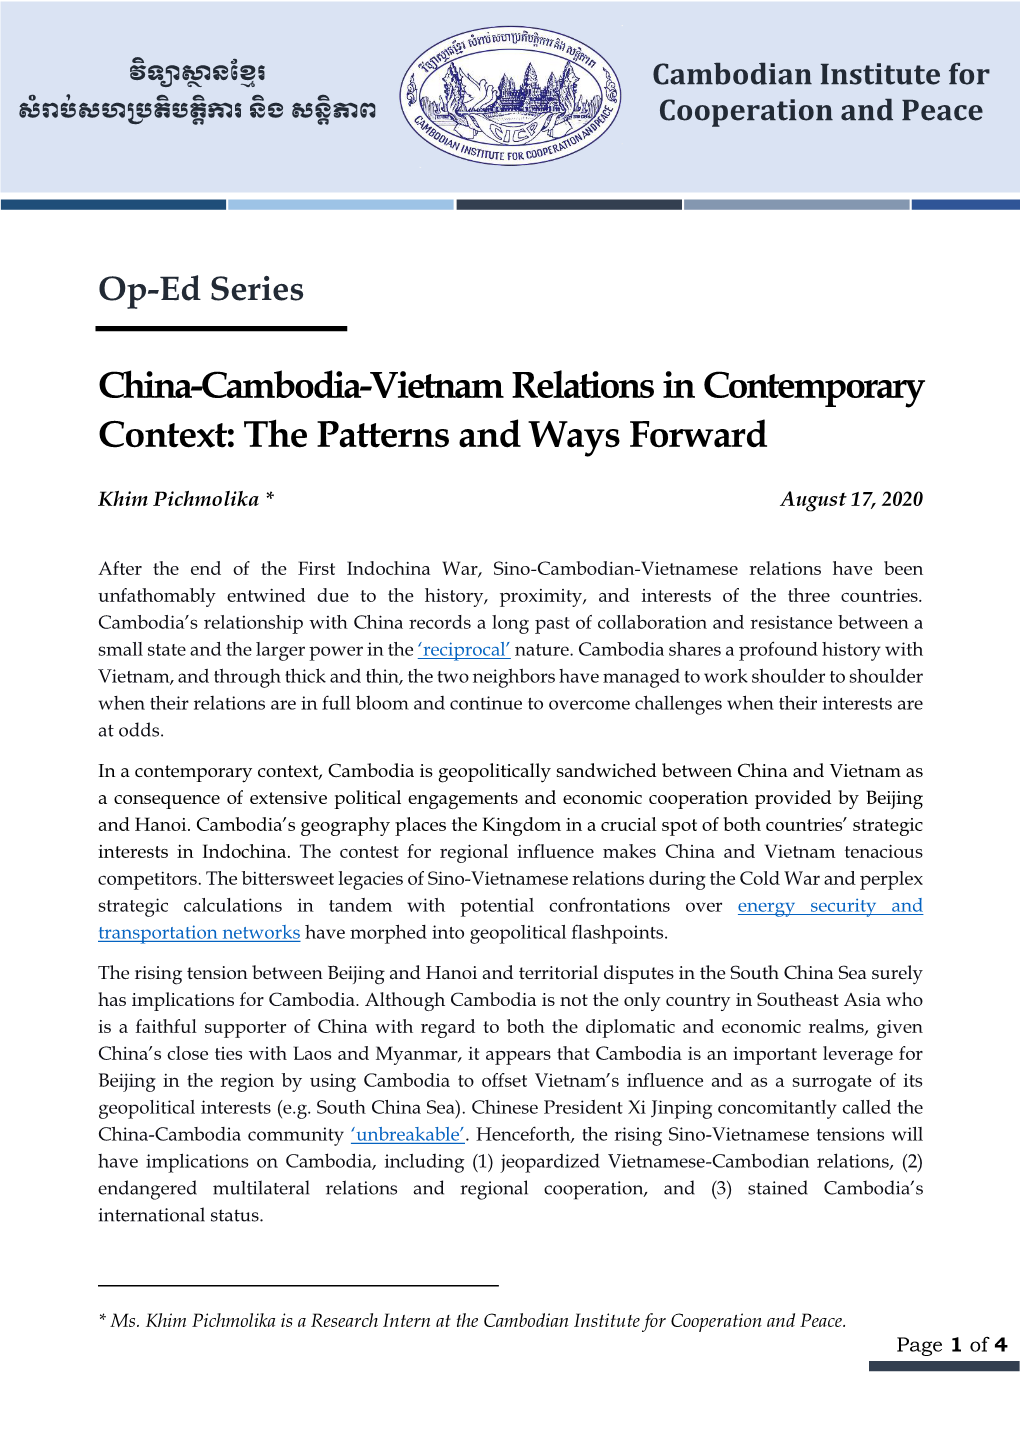 China-Cambodia-Vietnam Relations in Contemporary Context: the Patterns and Ways Forward